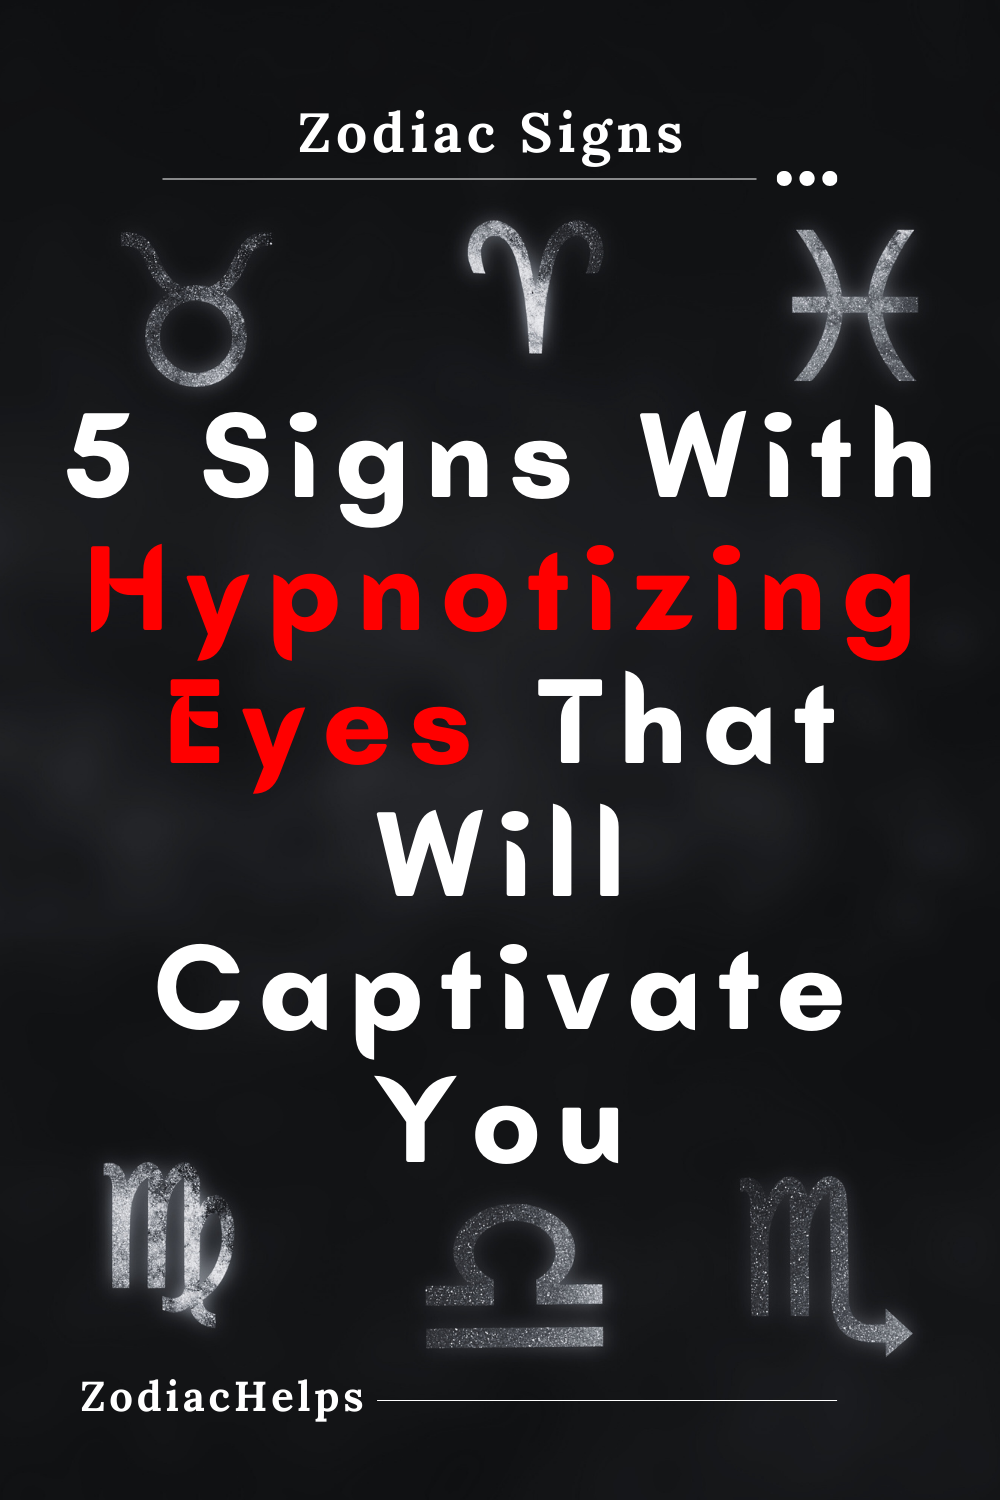 5 Signs With Hypnotizing Eyes That Will Captivate You